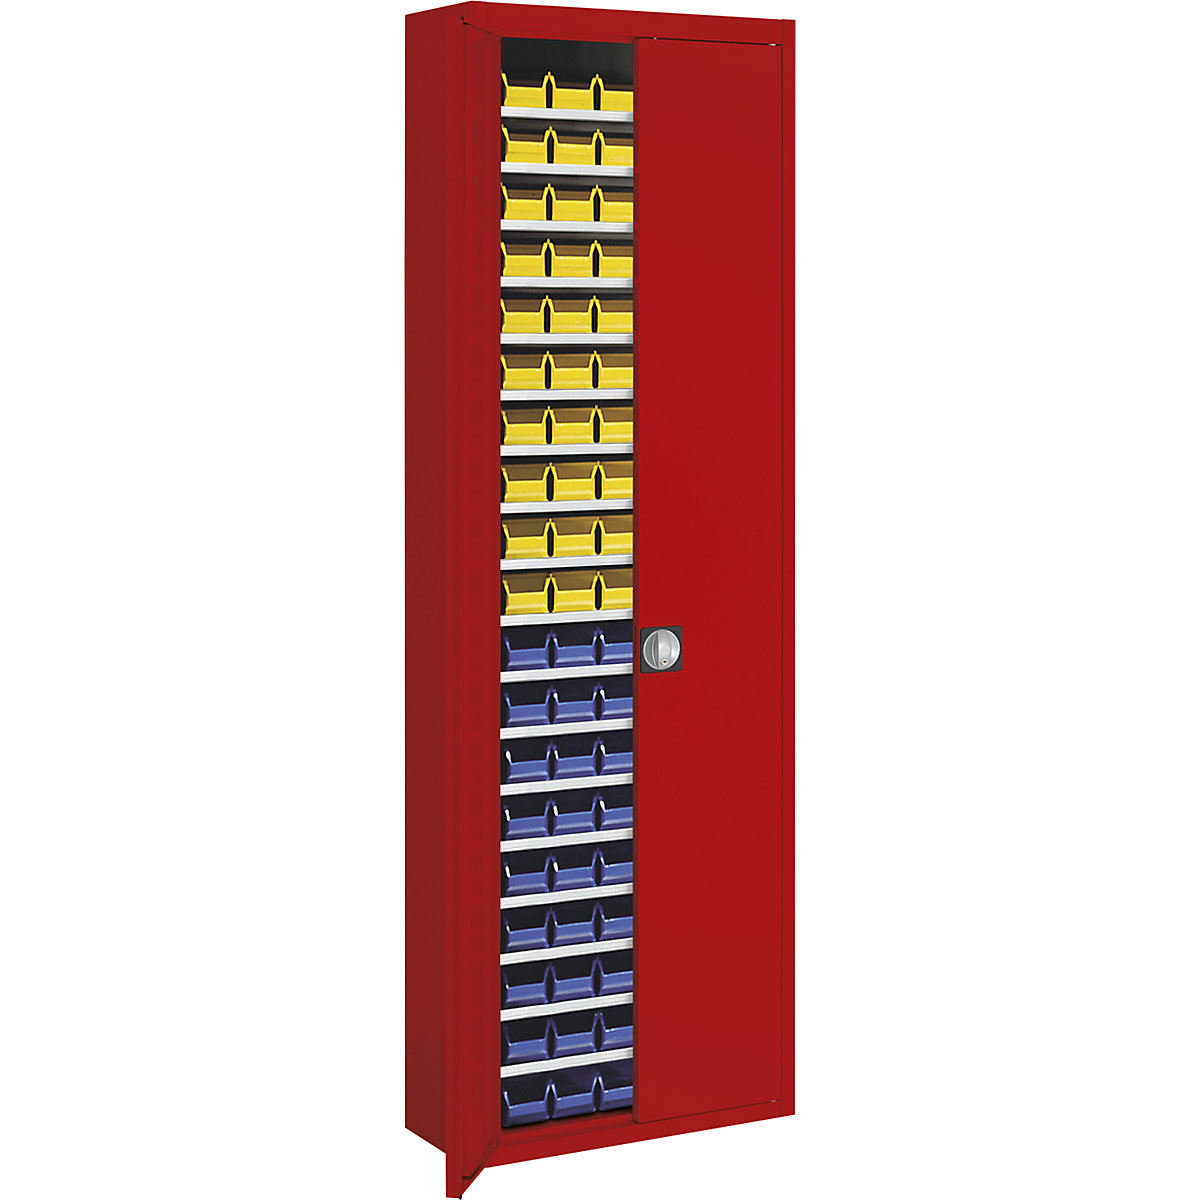 Storage cupboard with open fronted storage bins – mauser, HxWxD 2150 x 680 x 280 mm, single colour, red, 114 bins-1